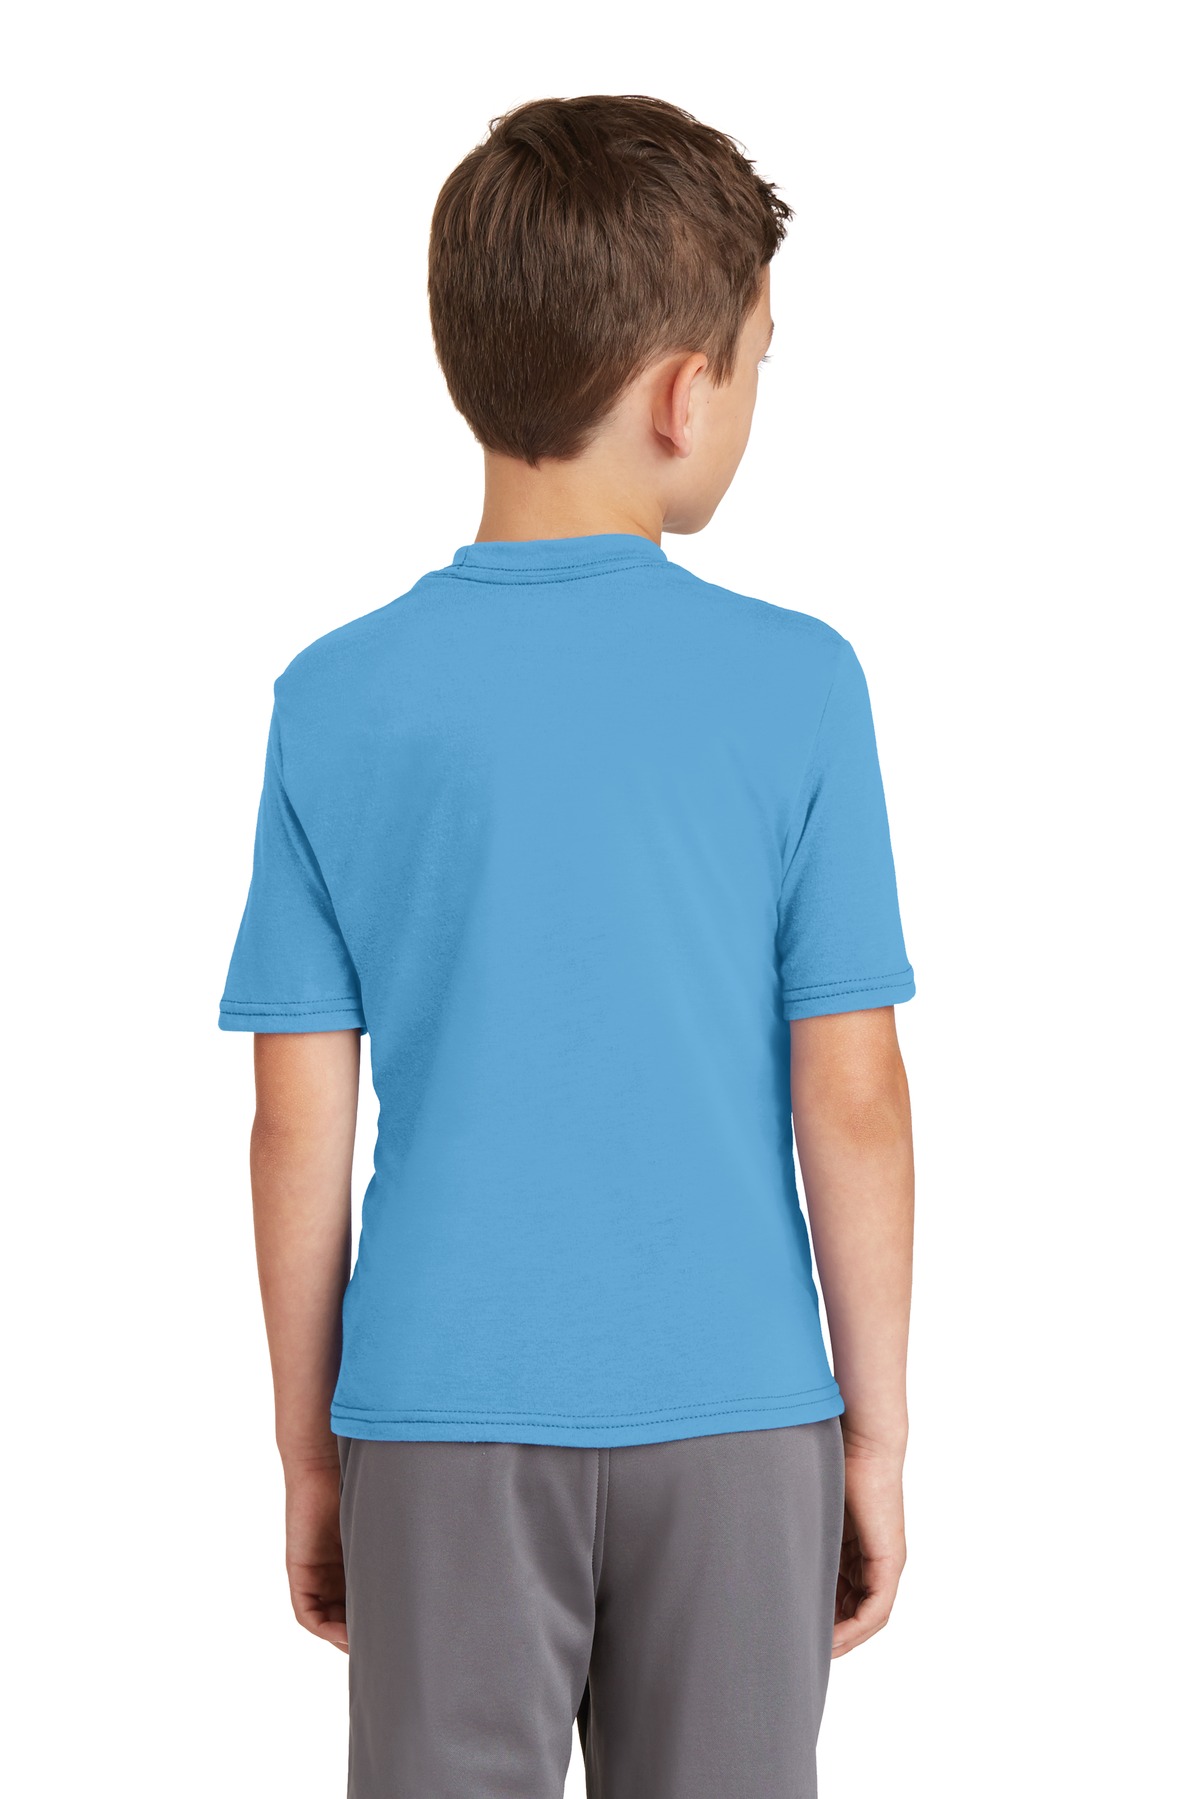 Port & Company PC381Y | Youth Performance Blend Tee | ShirtSpace